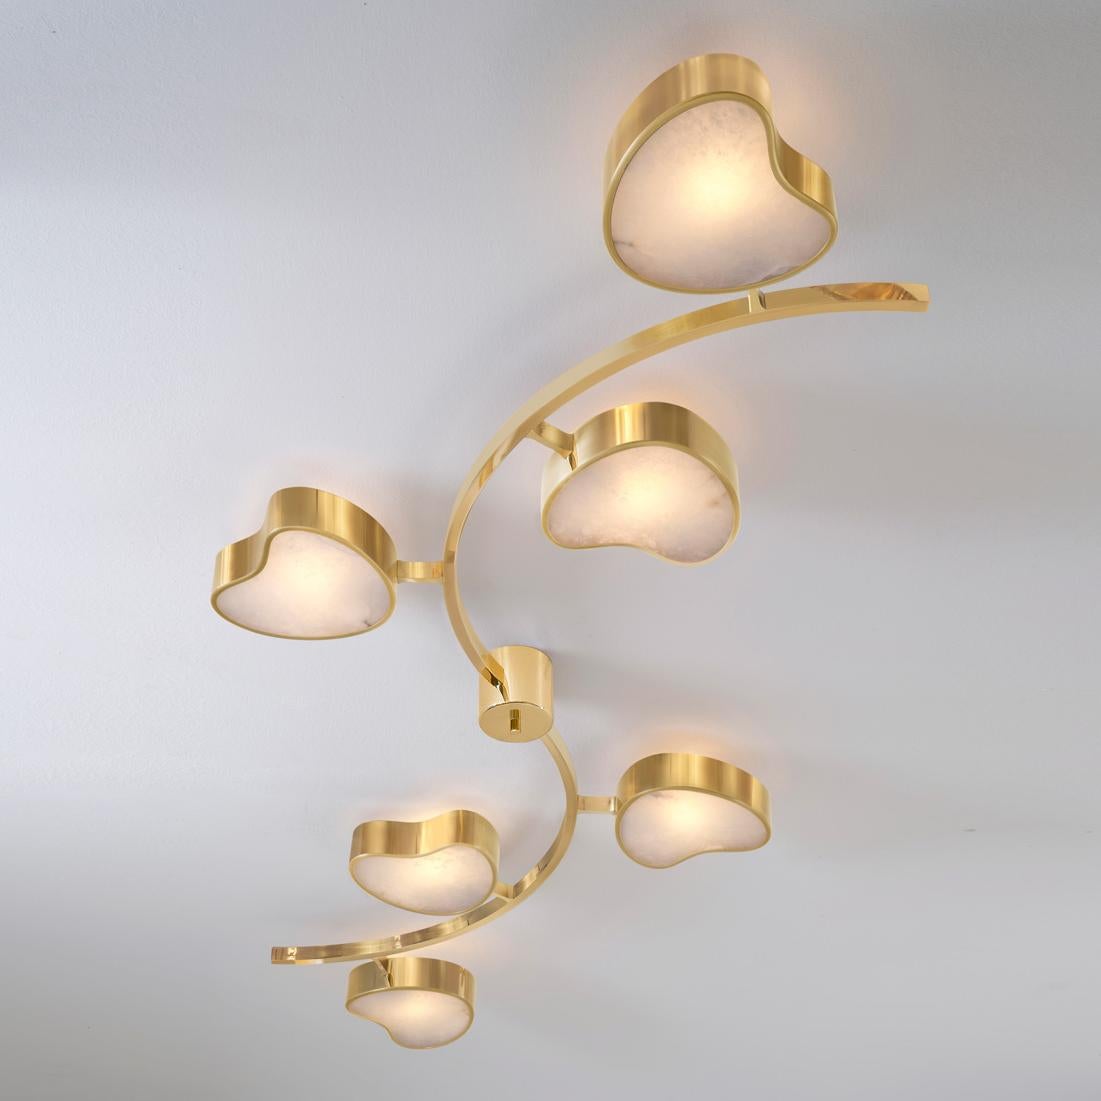 Italian Cuore N.6 Ceiling Light by Gaspare Asaro. Bronze and Satin Brass Finish For Sale